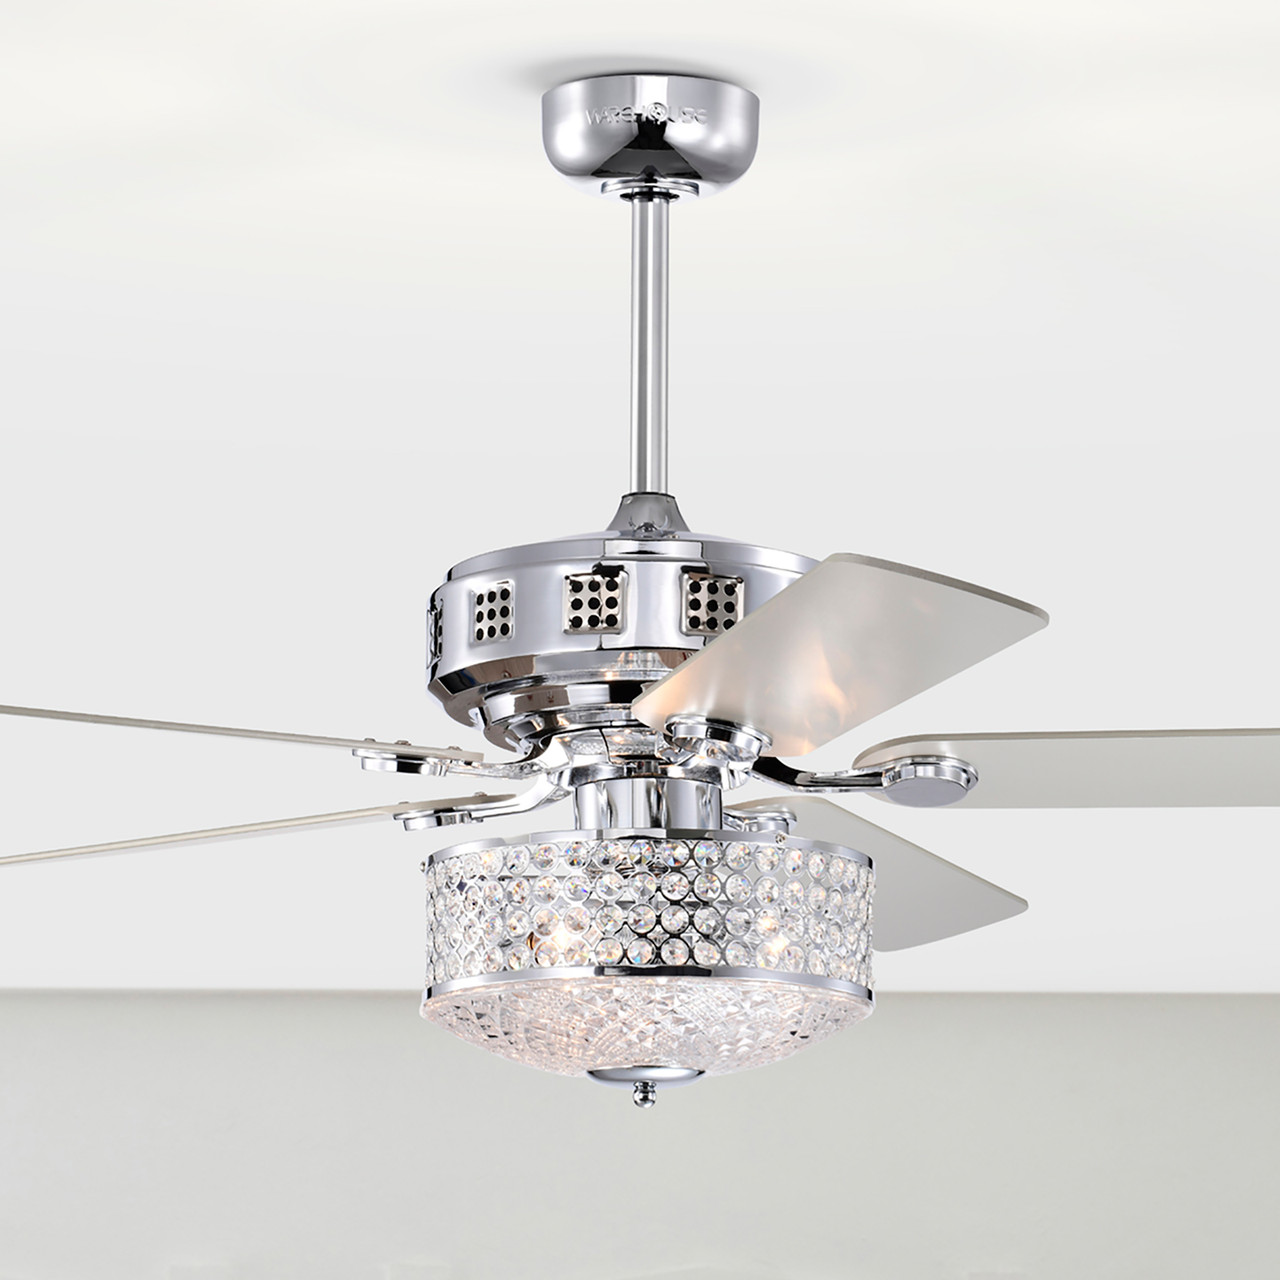 WAREHOUSE OF TIFFANY'S AY16Y16CR Callen 52 in. 3-Light Indoor Chrome Finish Ceiling Fan with Light Kit